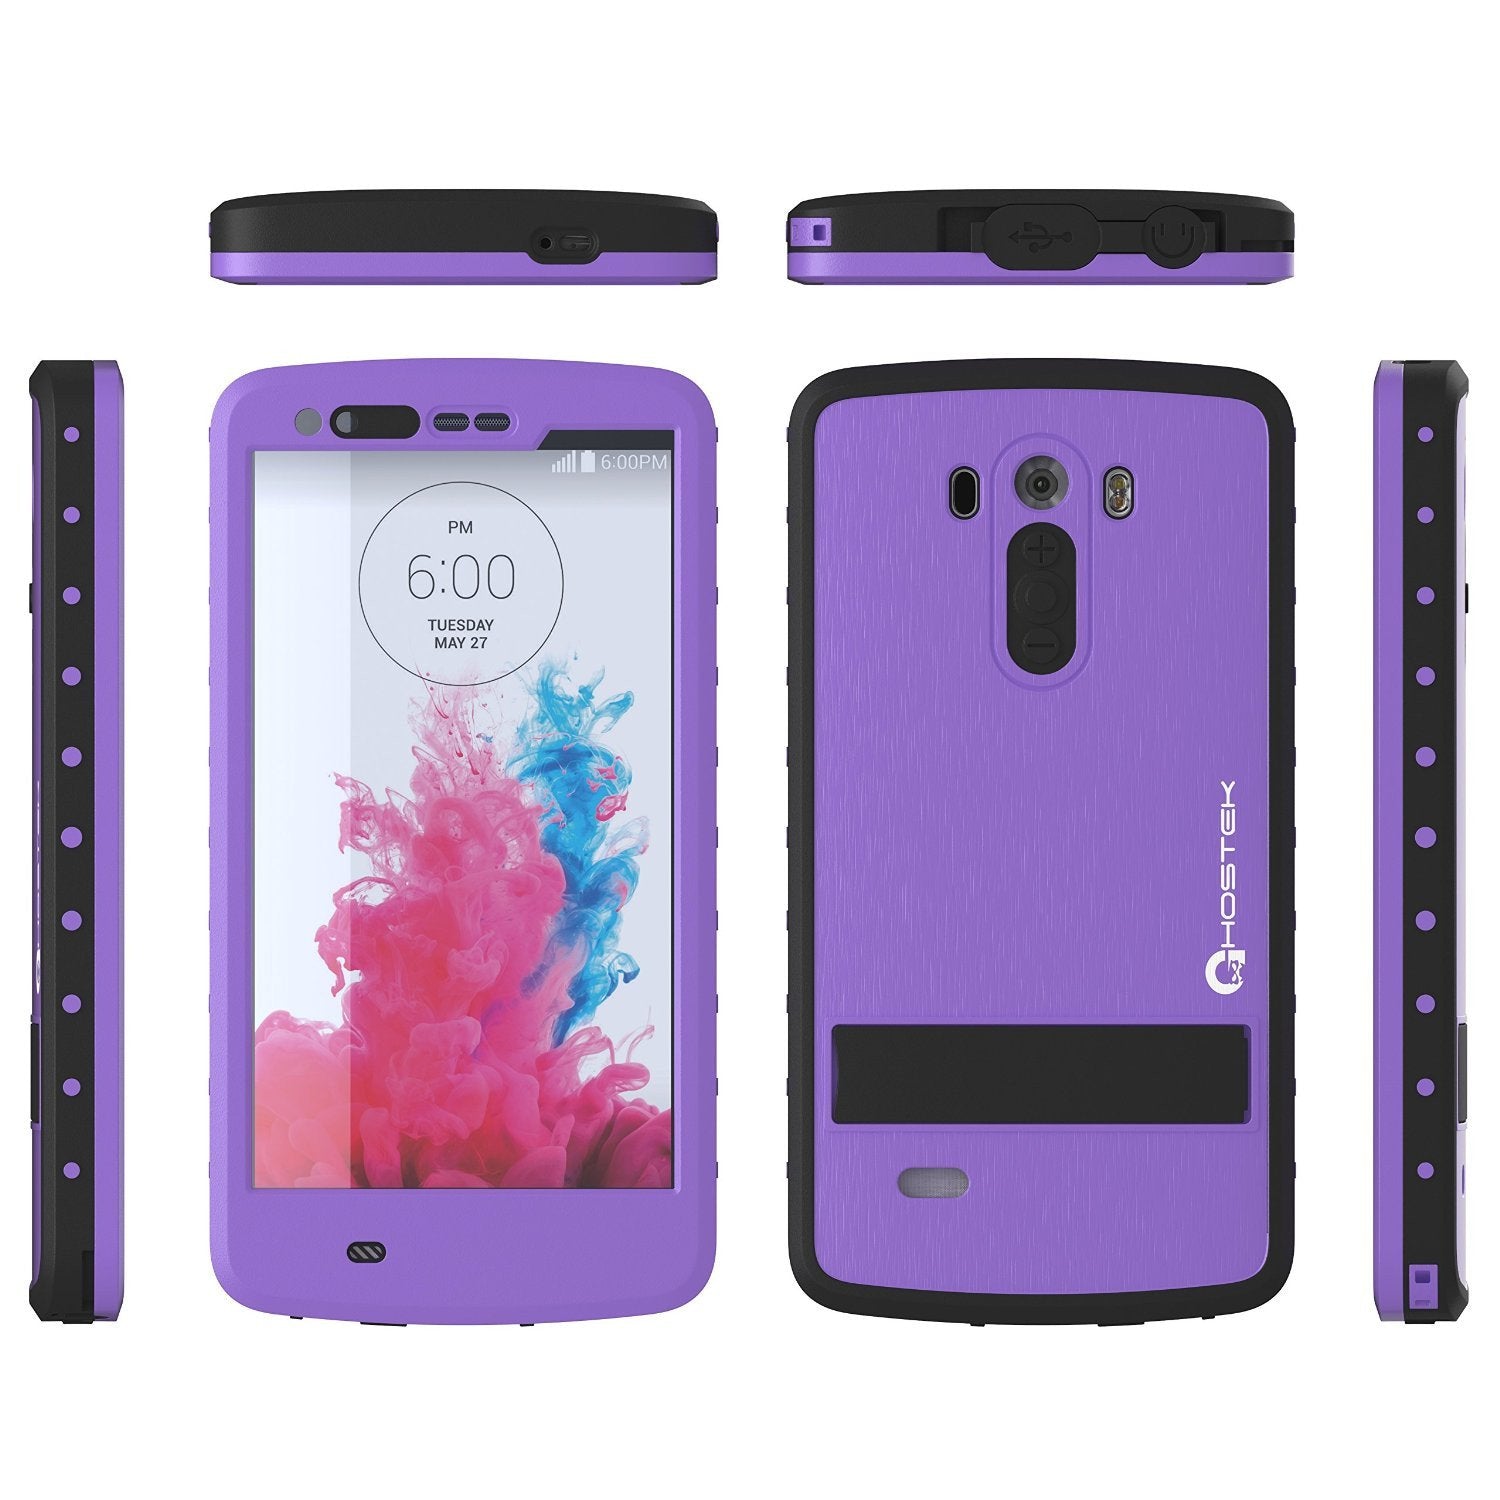 LG G3 Waterproof Case, Ghostek Atomic PURPLE W/ Attached Screen Protector  Slim Fitted  LG G3 - PunkCase NZ